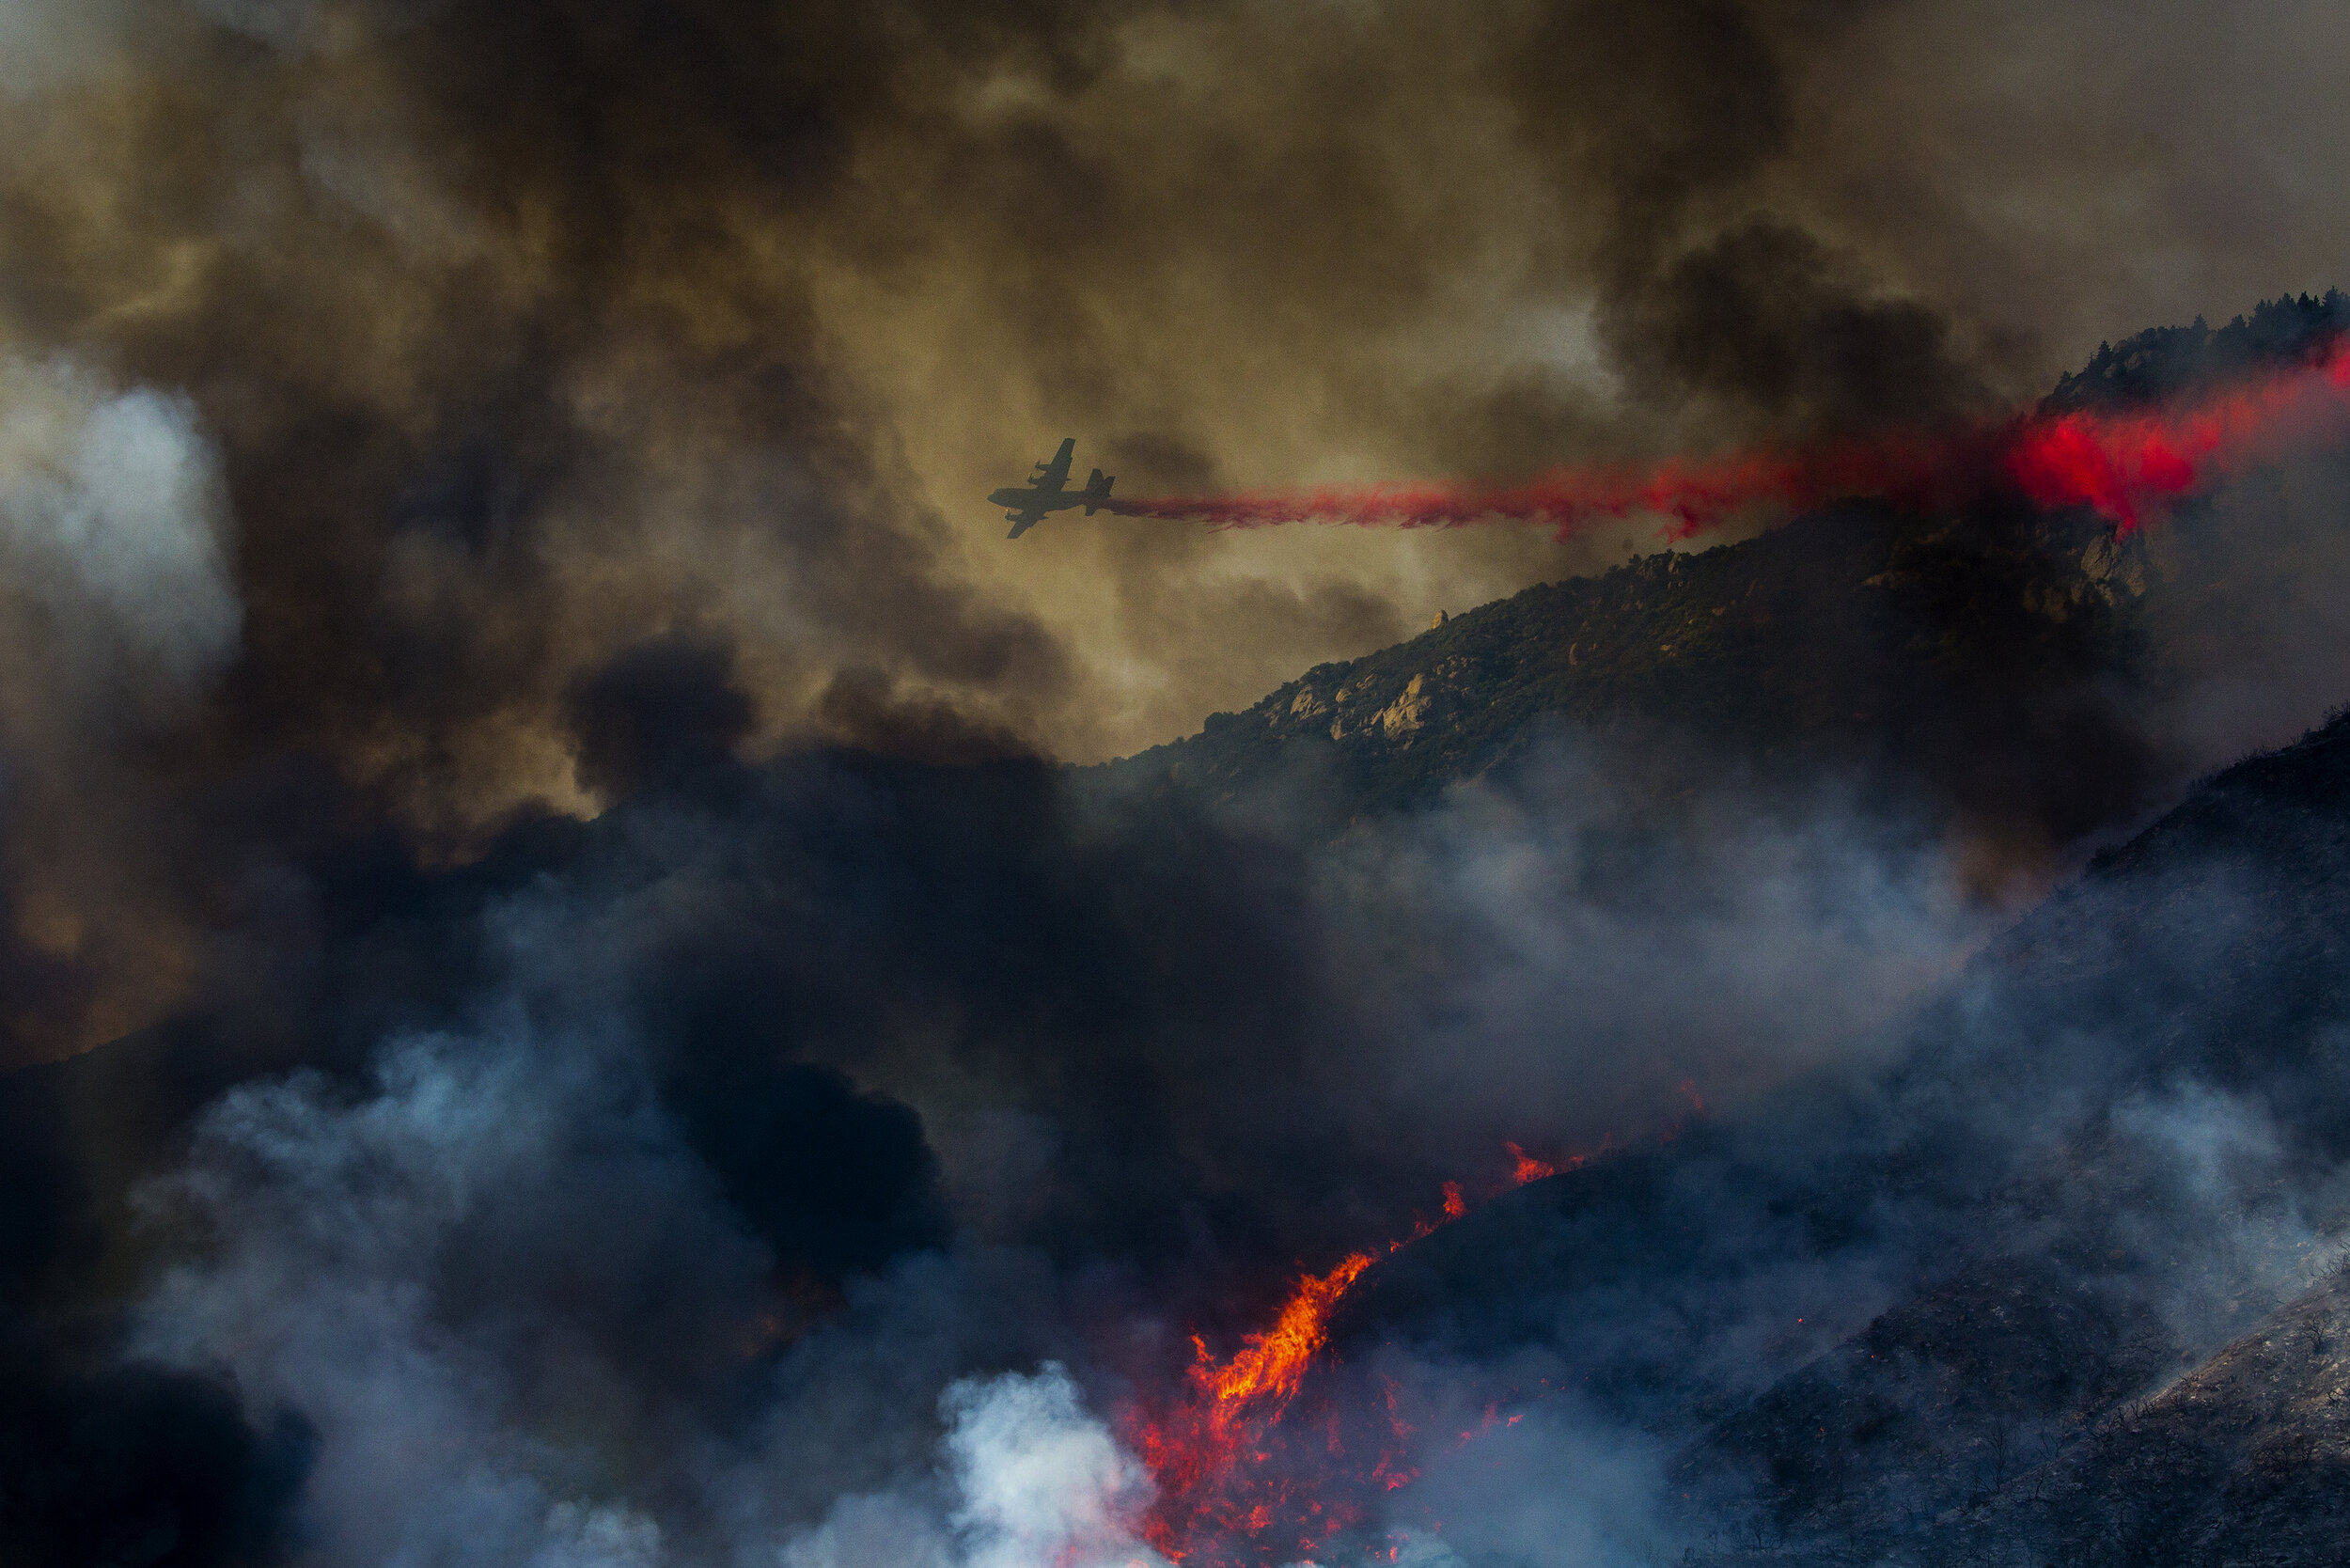  An air tanker drops retardant at a wildfire burns at a hillside in Yucaipa, Calif., Saturday, Sept. 5, 2020. The 2020 California wildfire season was characterized by a record-setting year of wildfires that burned across the state of California as me